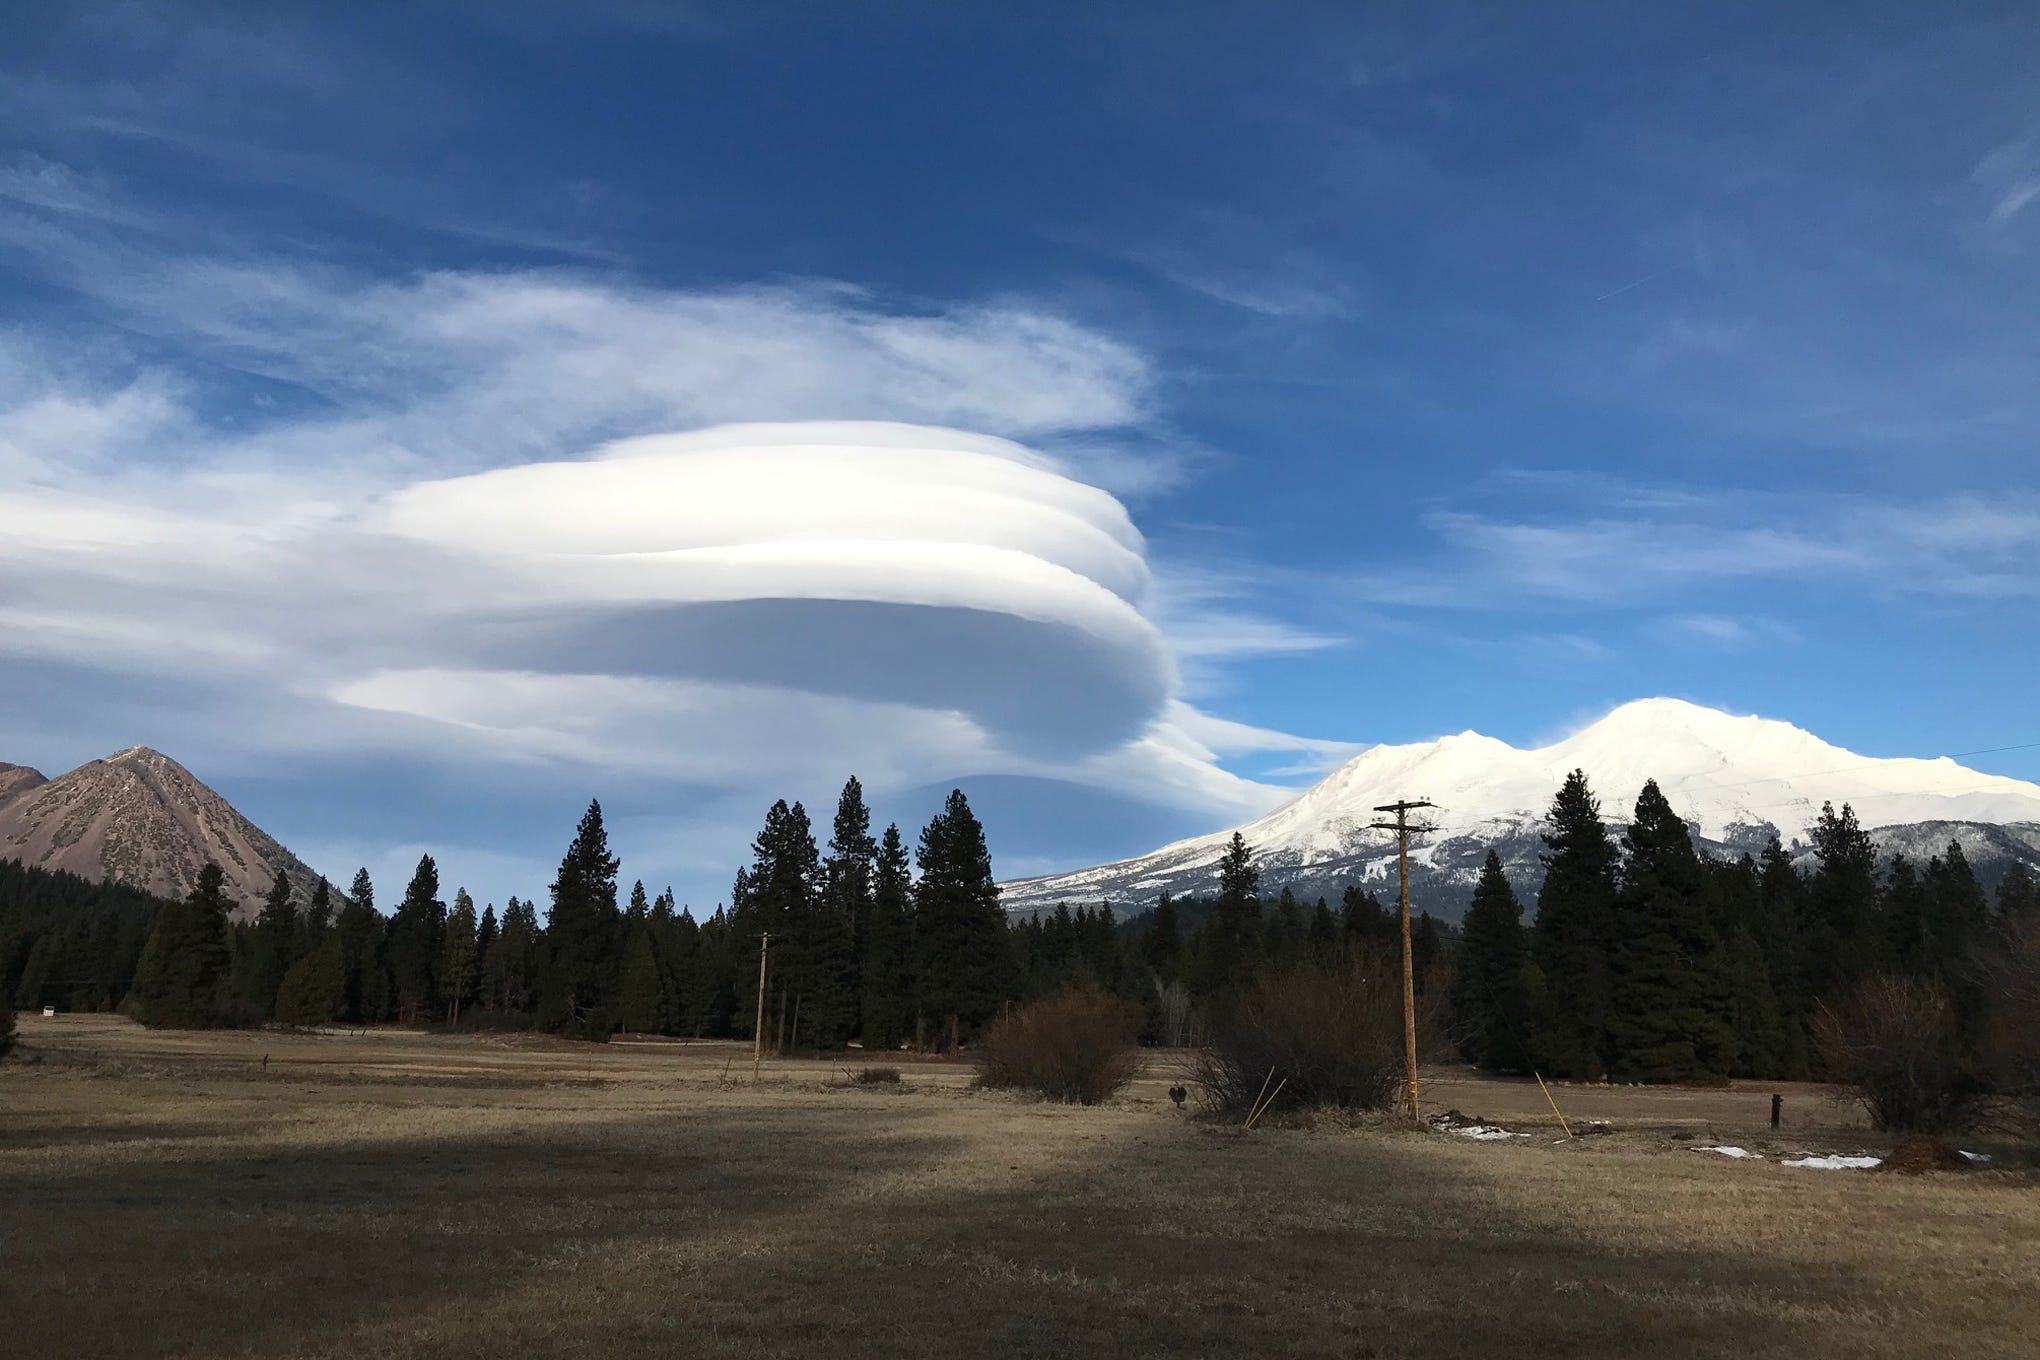 A lenticular cloud can be seen between Black Butte and Mt. Shasta.